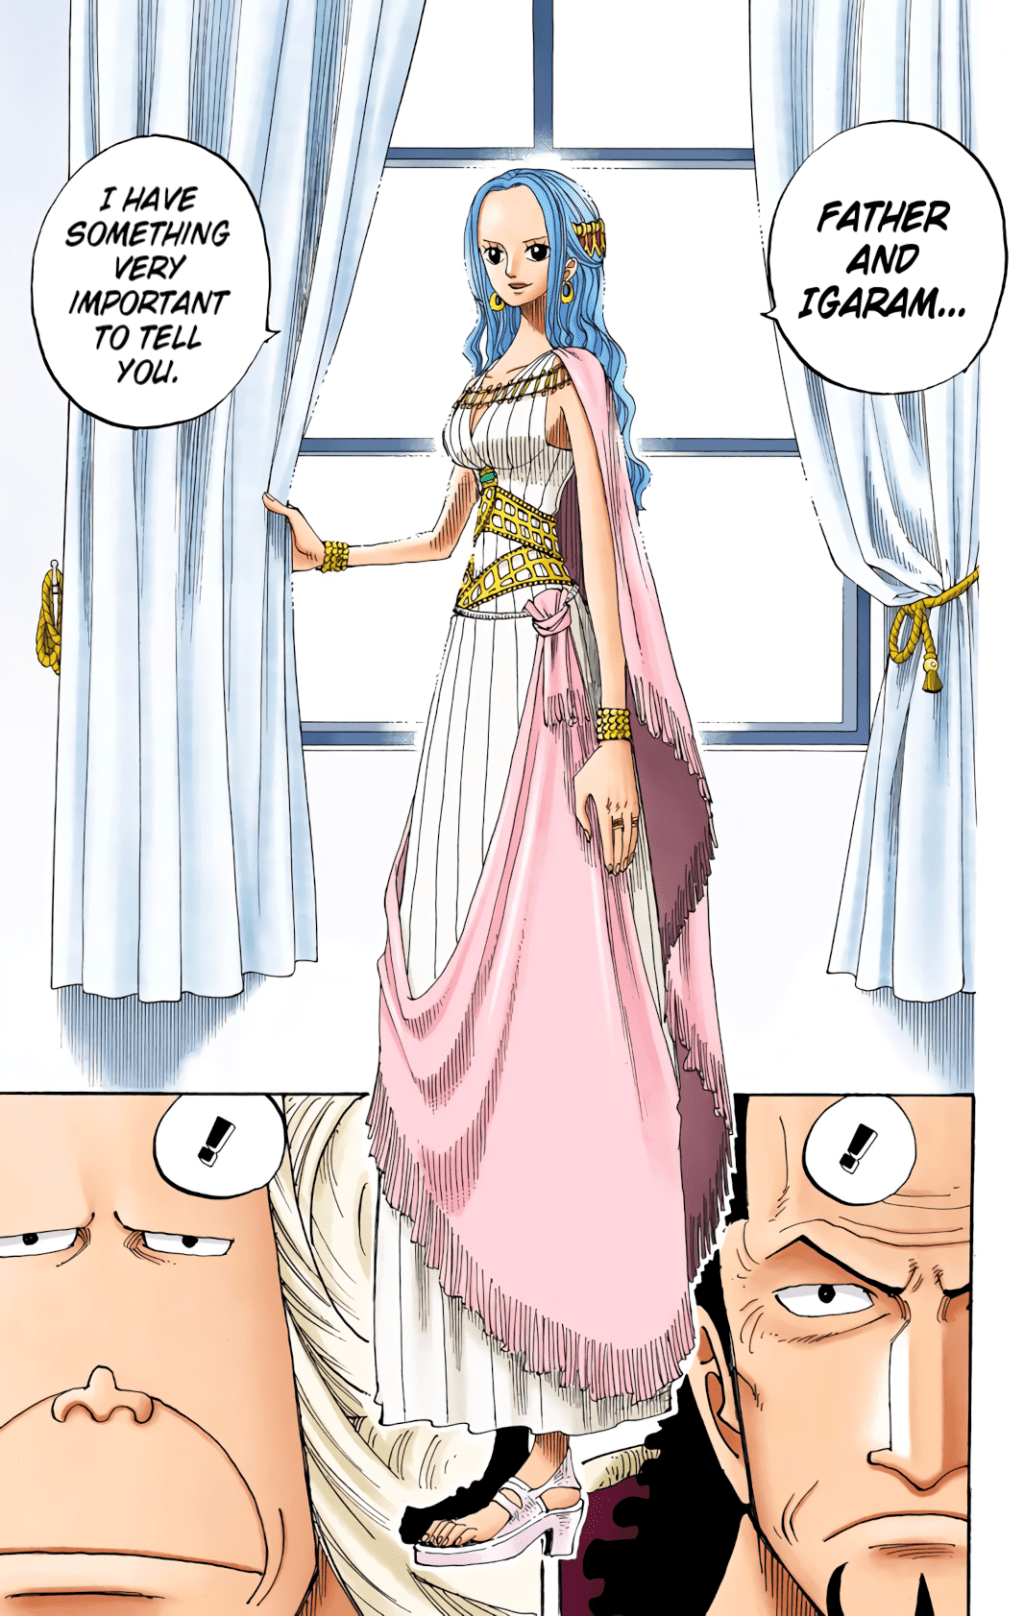 Vivi prepares to reveal the truth about her travels in One Piece Chapter 215 "Last Waltz" (2002), Shueisha. Words and art by Eiichiro Oda.